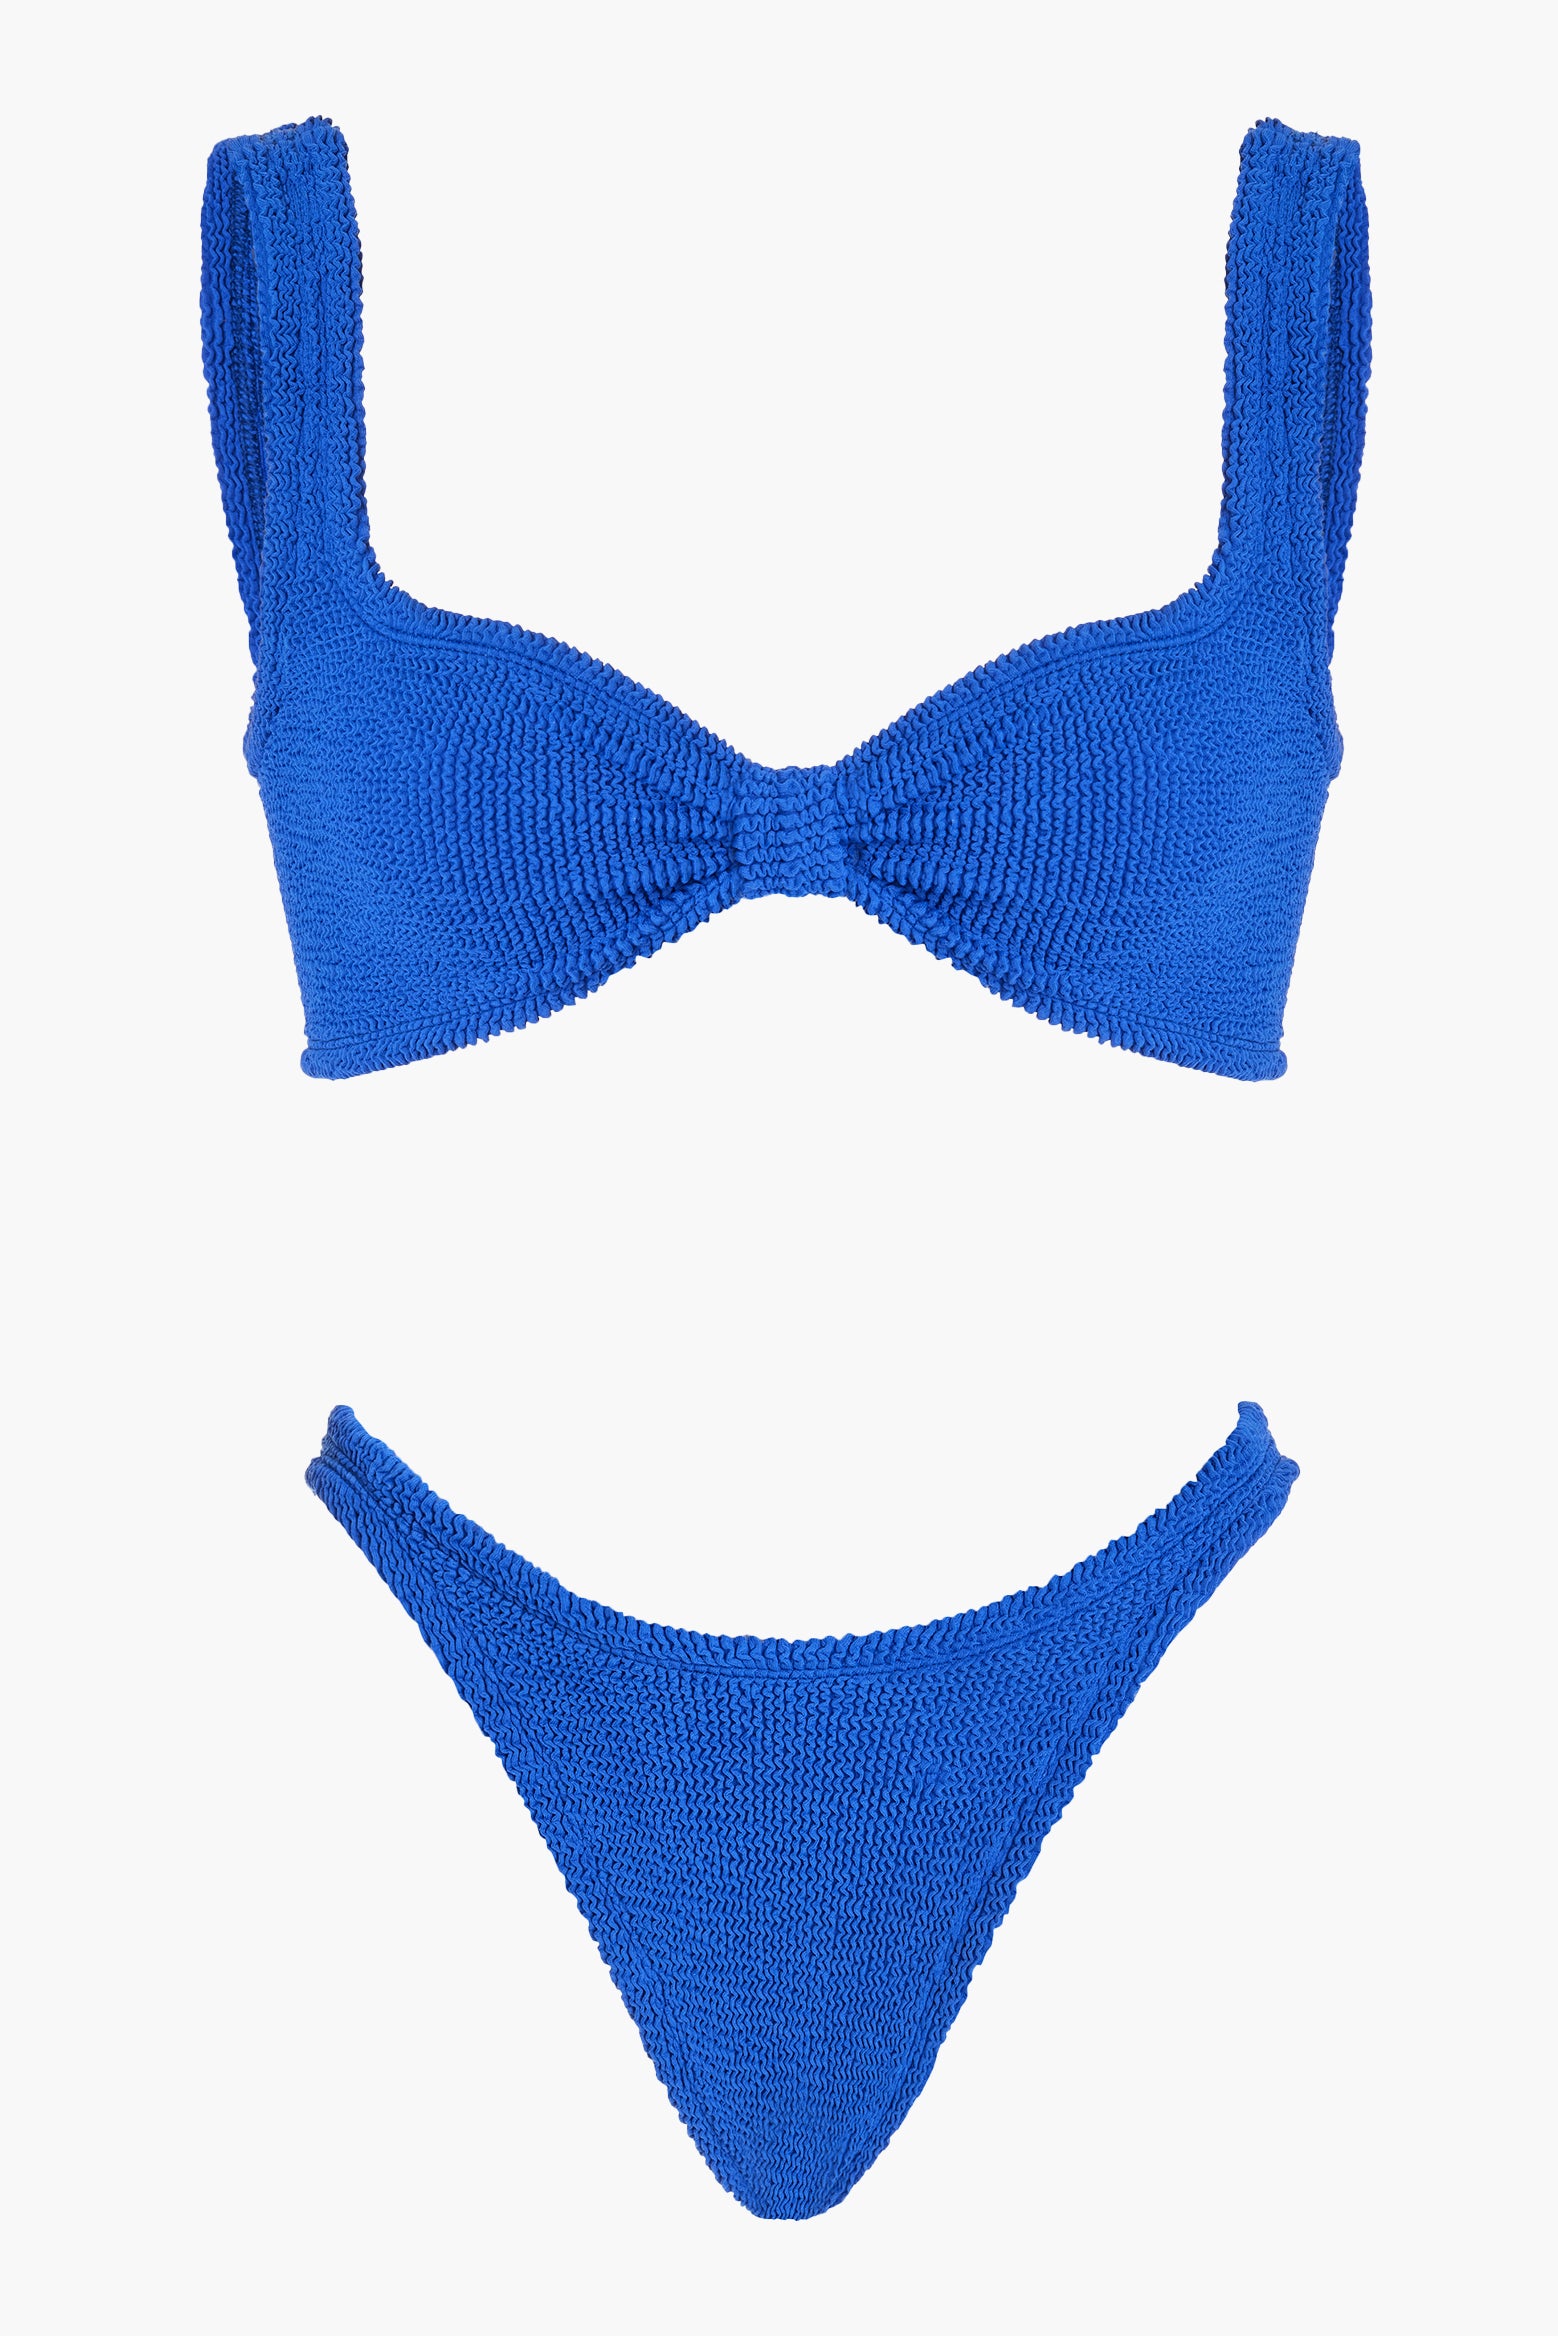 The Hunza G Bonnie Bikini in Royal Blue available at The New Trend Australia